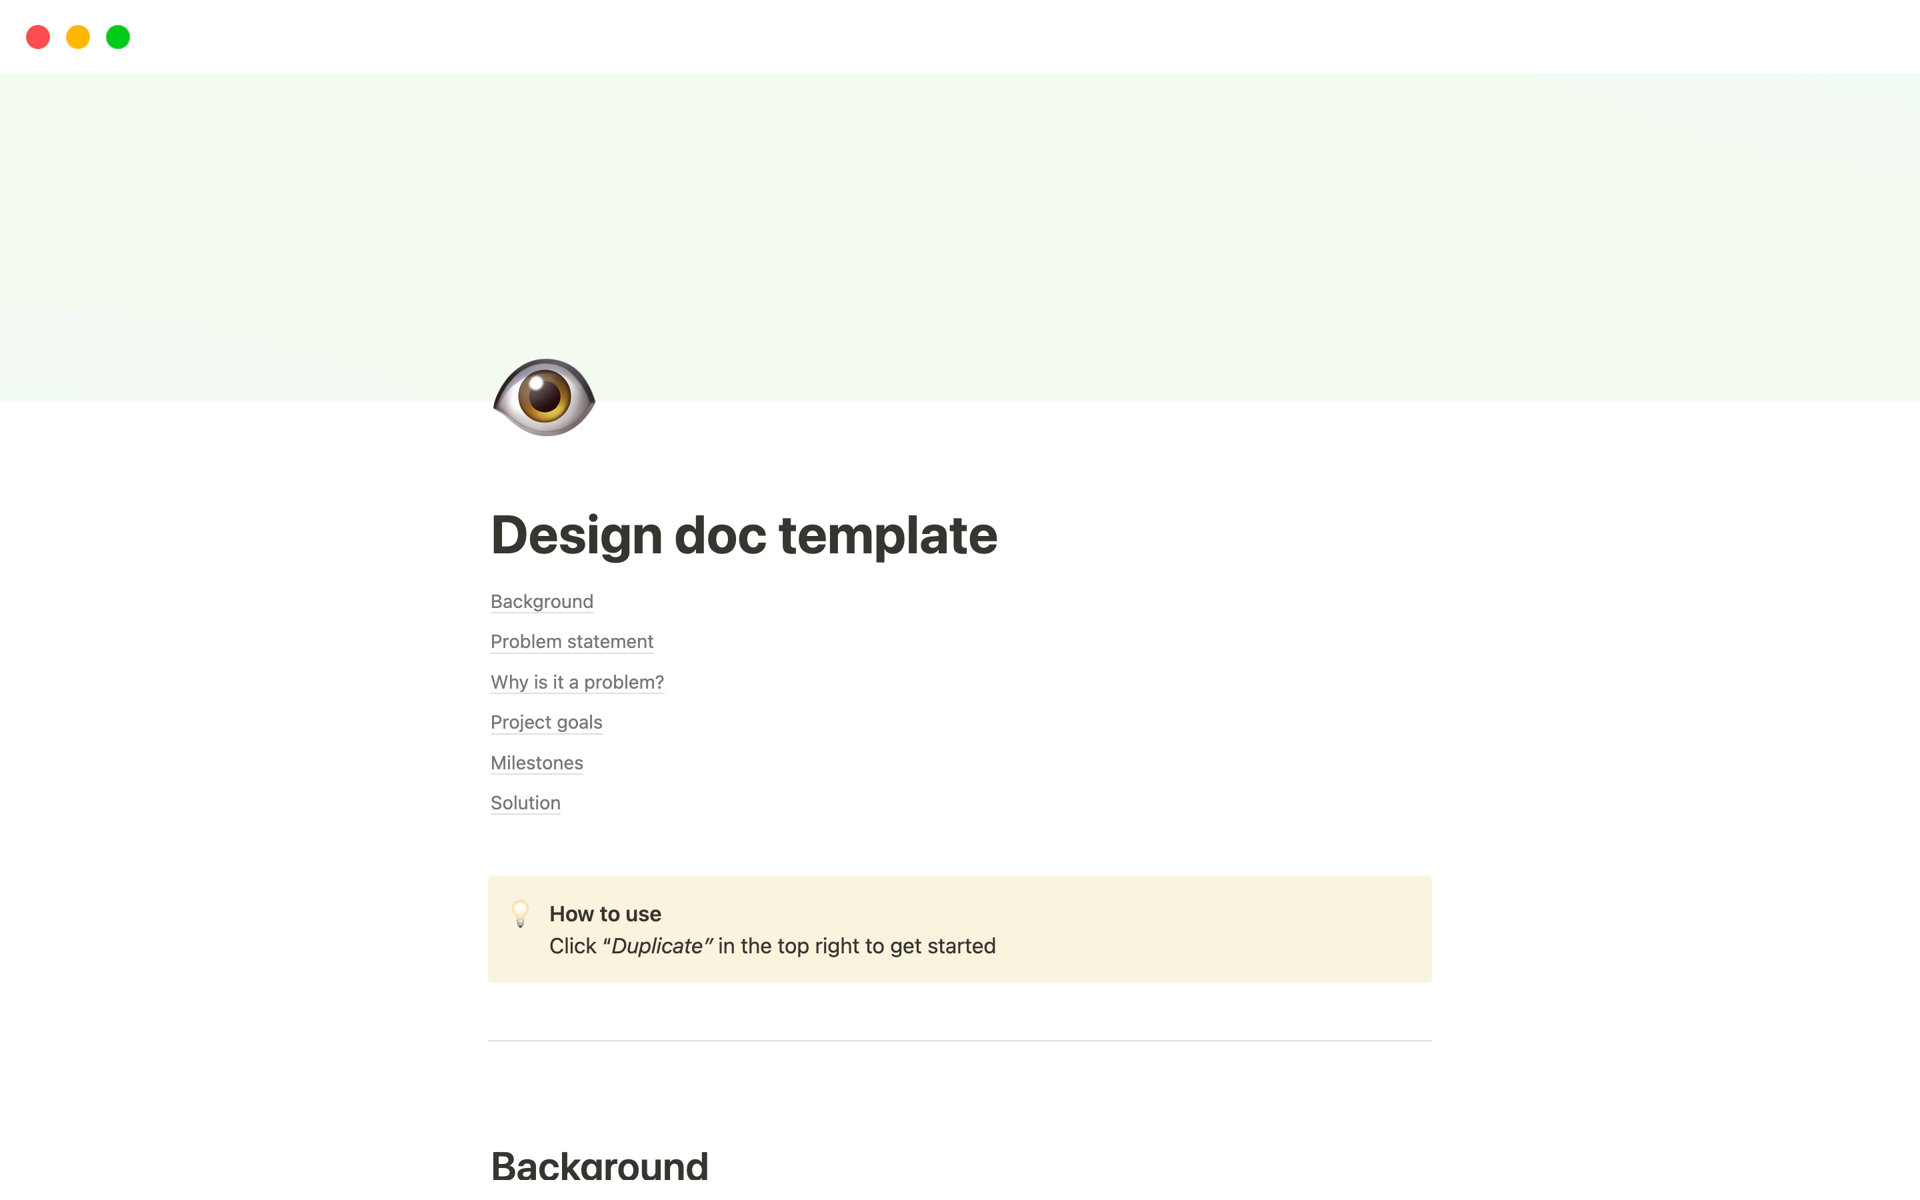 Document your product design process